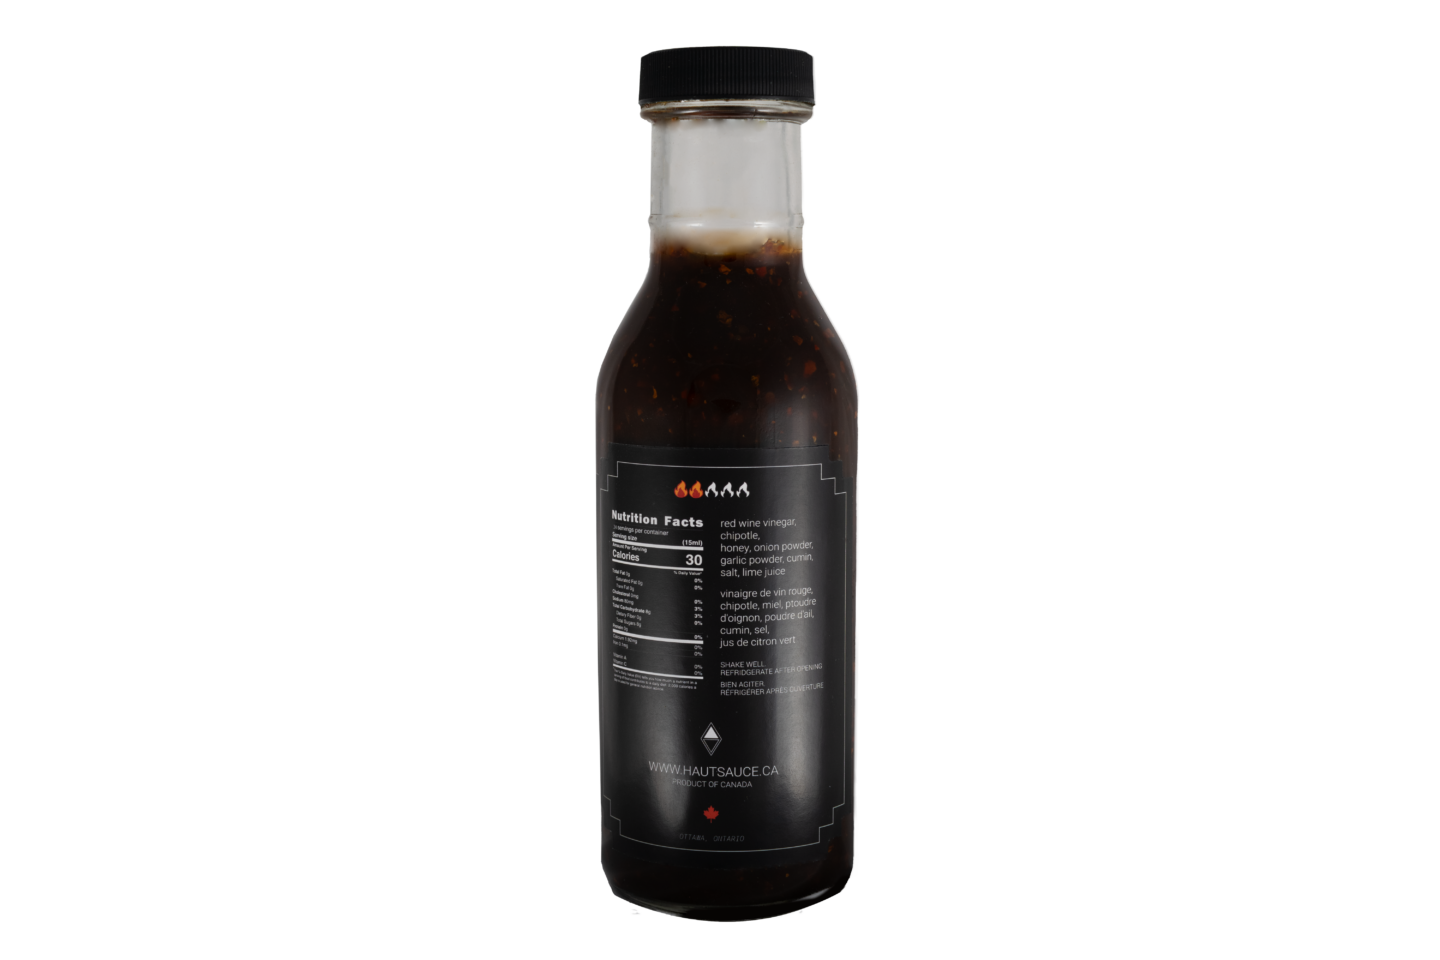 Back label view of 12 ounce chipotle honey lime sauce by haut sauce co. Heat scale 2 out of 5. Ingredients red wine vinegar, chipotle, honey, onion powder, garlic powder, salt, cumin, lime juice.